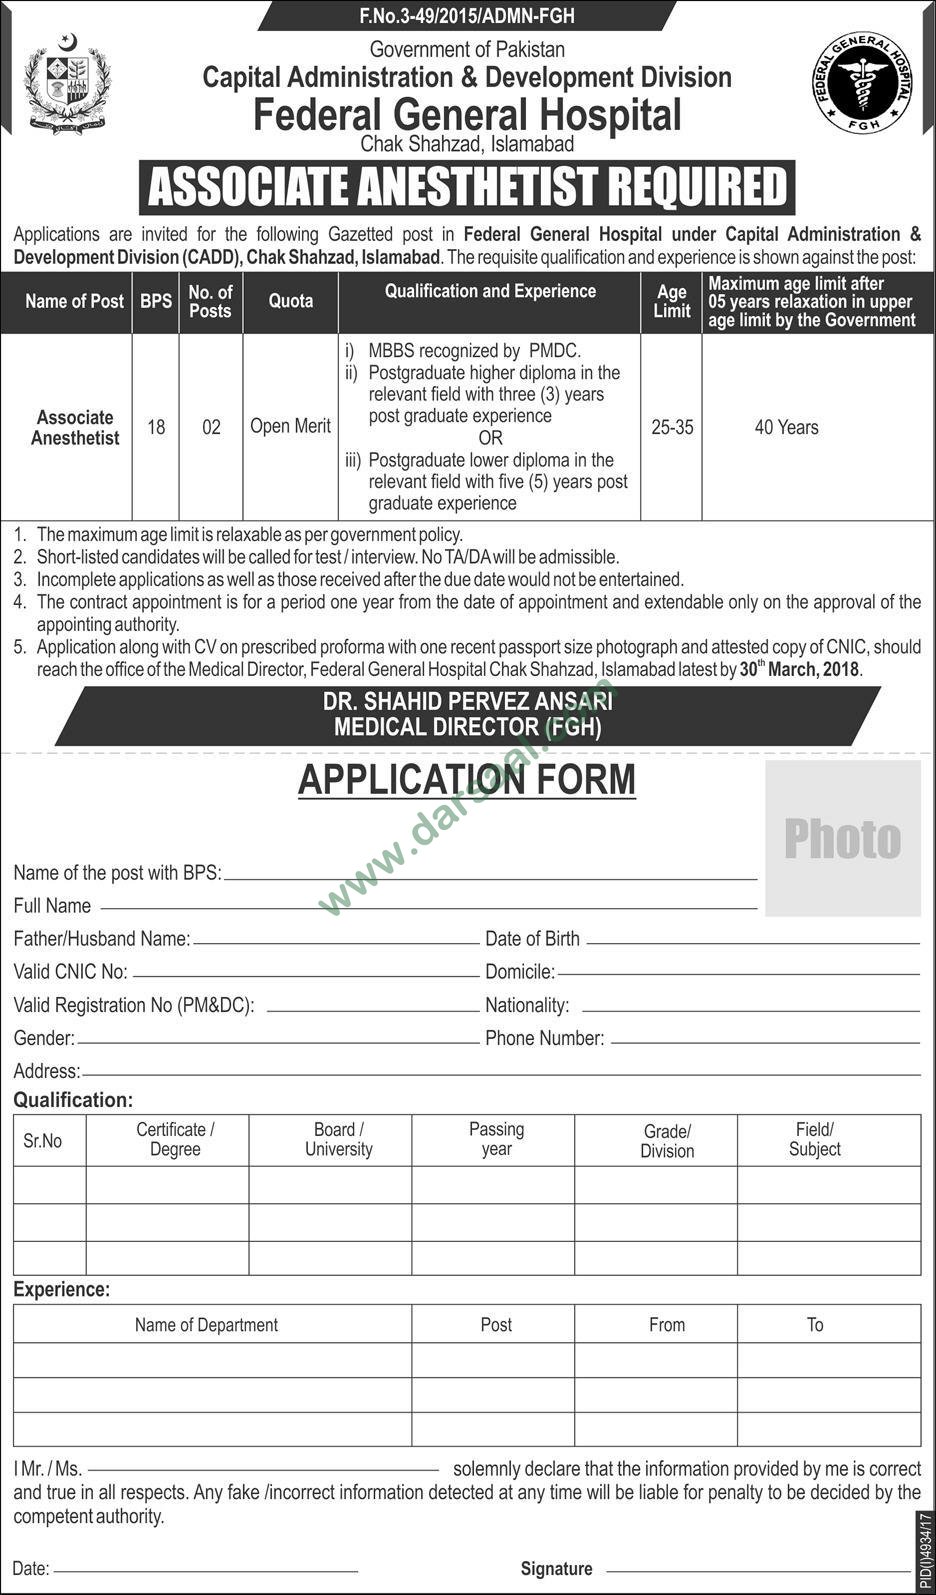 Associate Anesthetist, Jobs in Federal General Hospital Islamabad, 14 March 2018